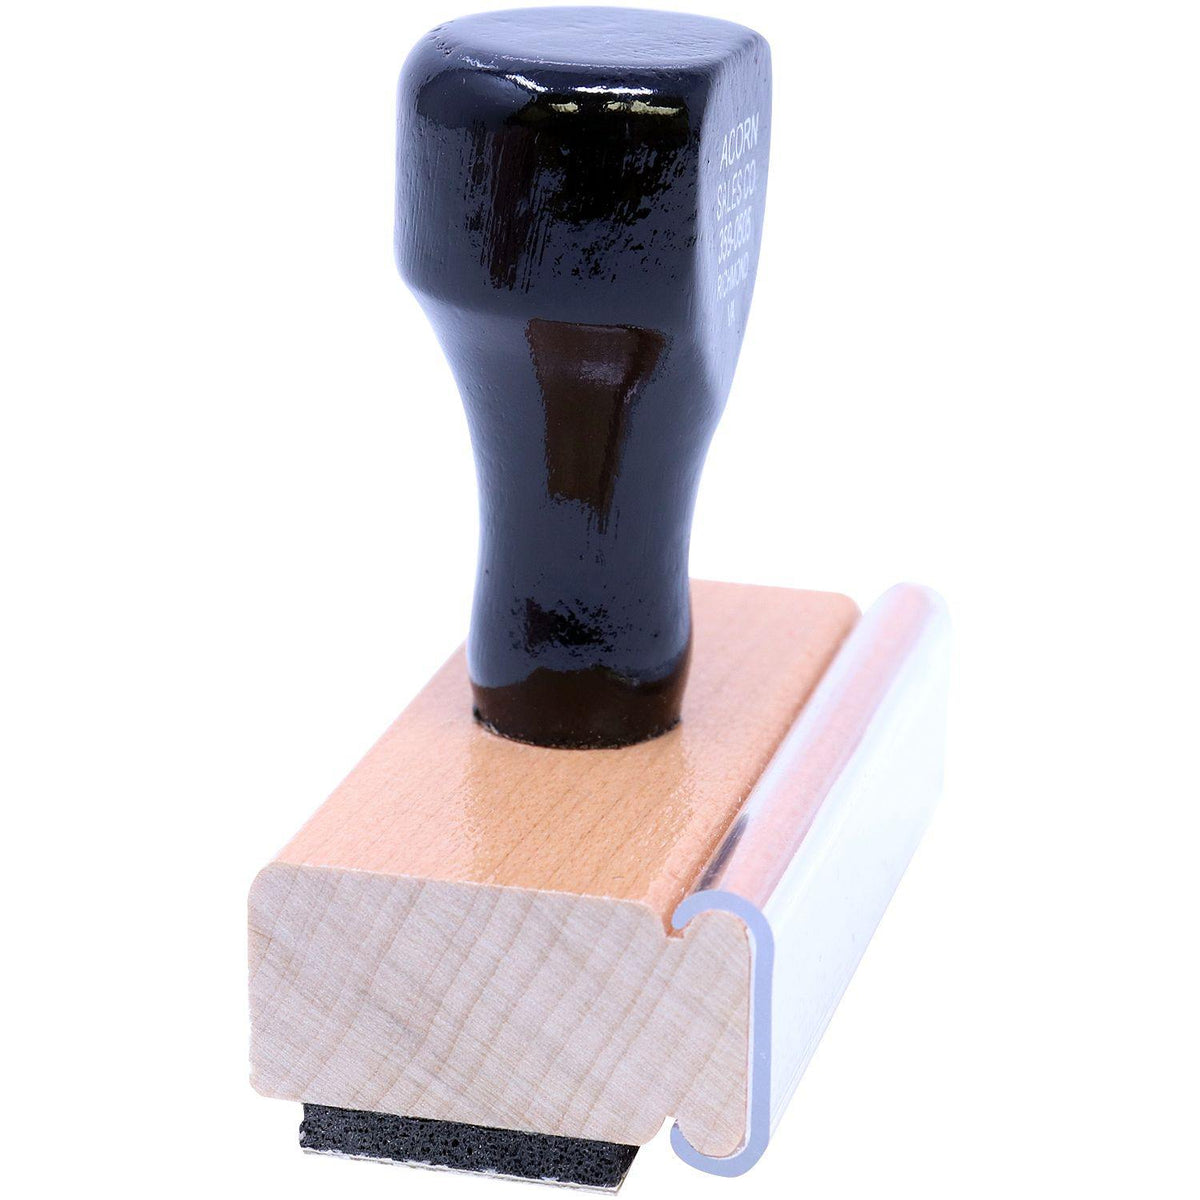 Side View of Large Personal Rubber Stamp at an Angle